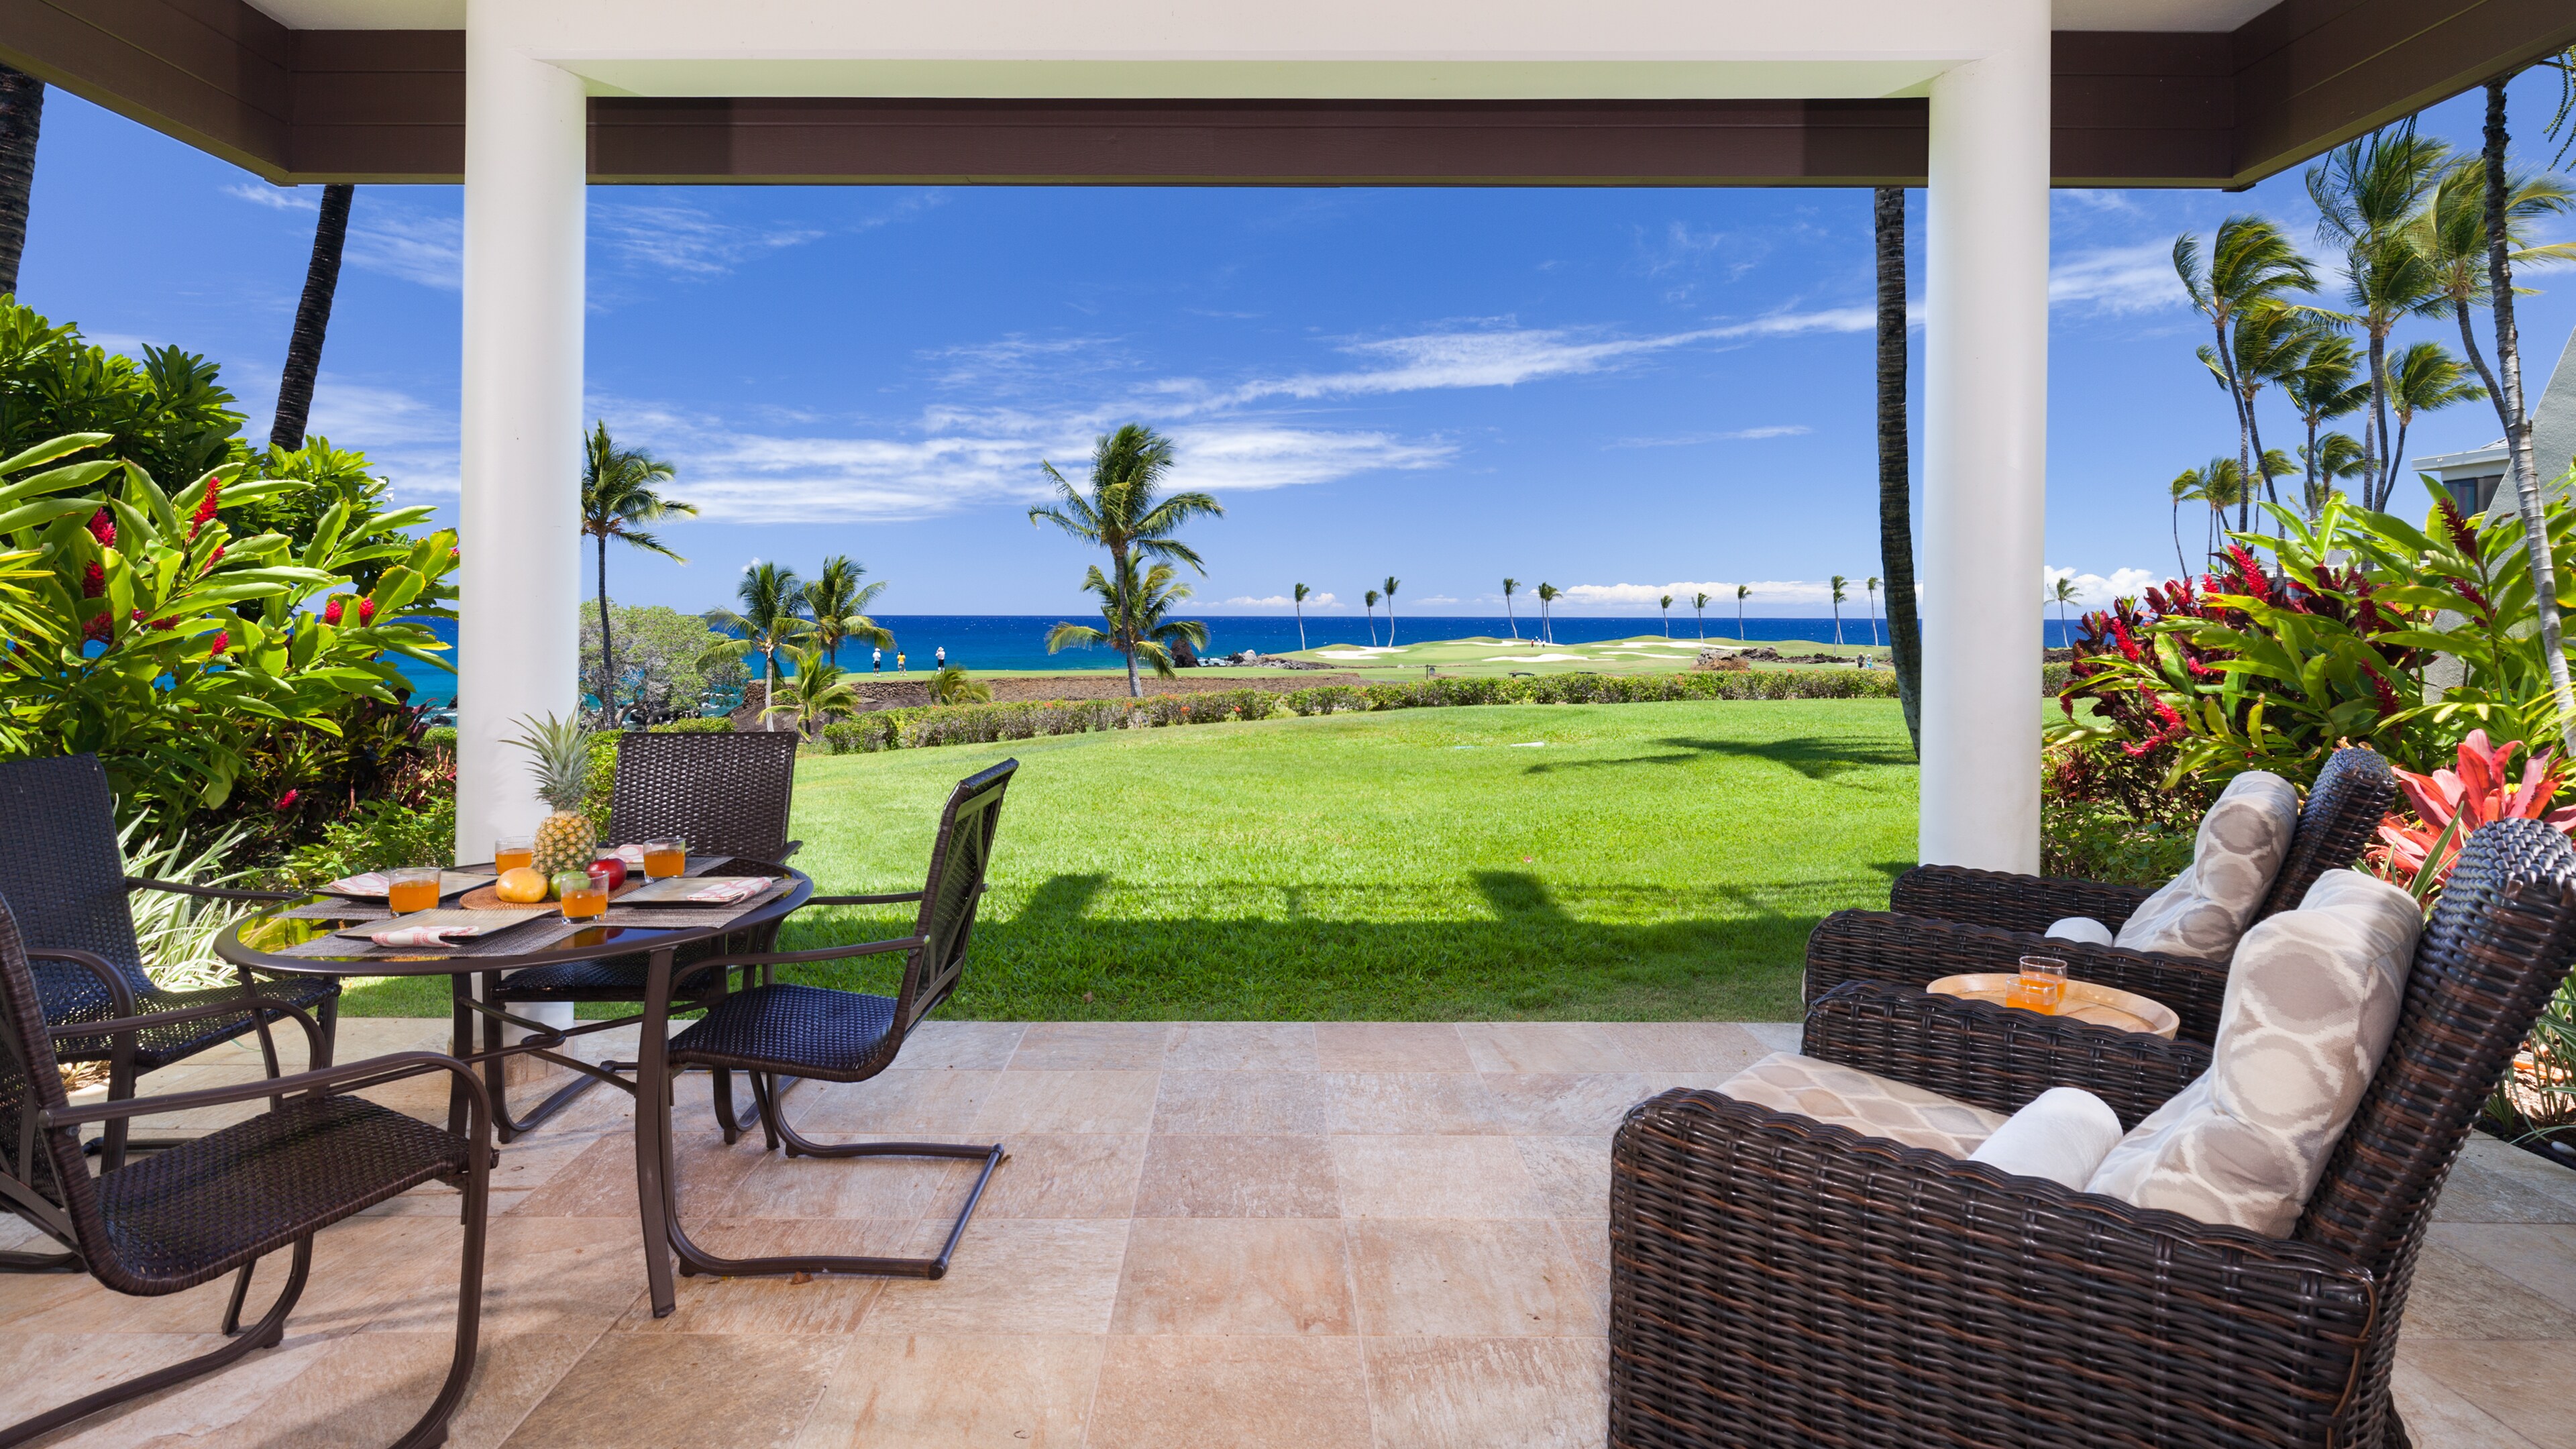 Welcome to Coastal Dreams Villa - This is the view from the lanai